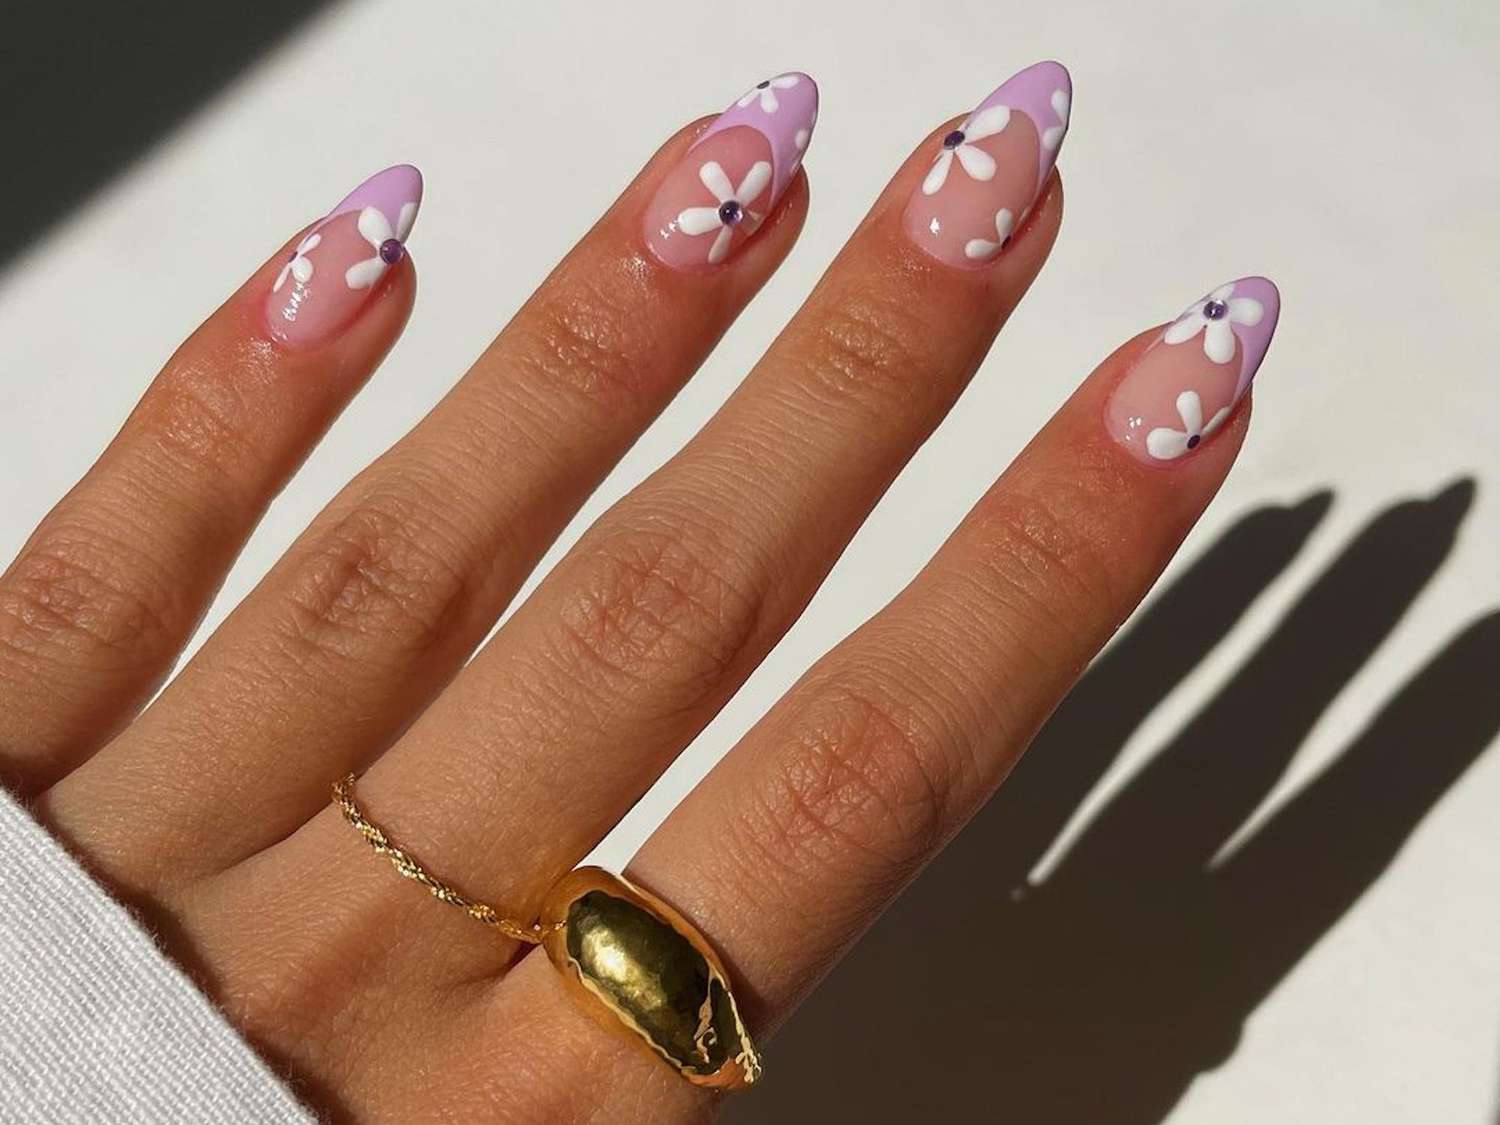 Vintage Vibes: Retro Nail Art Designs Youve Got To Try!